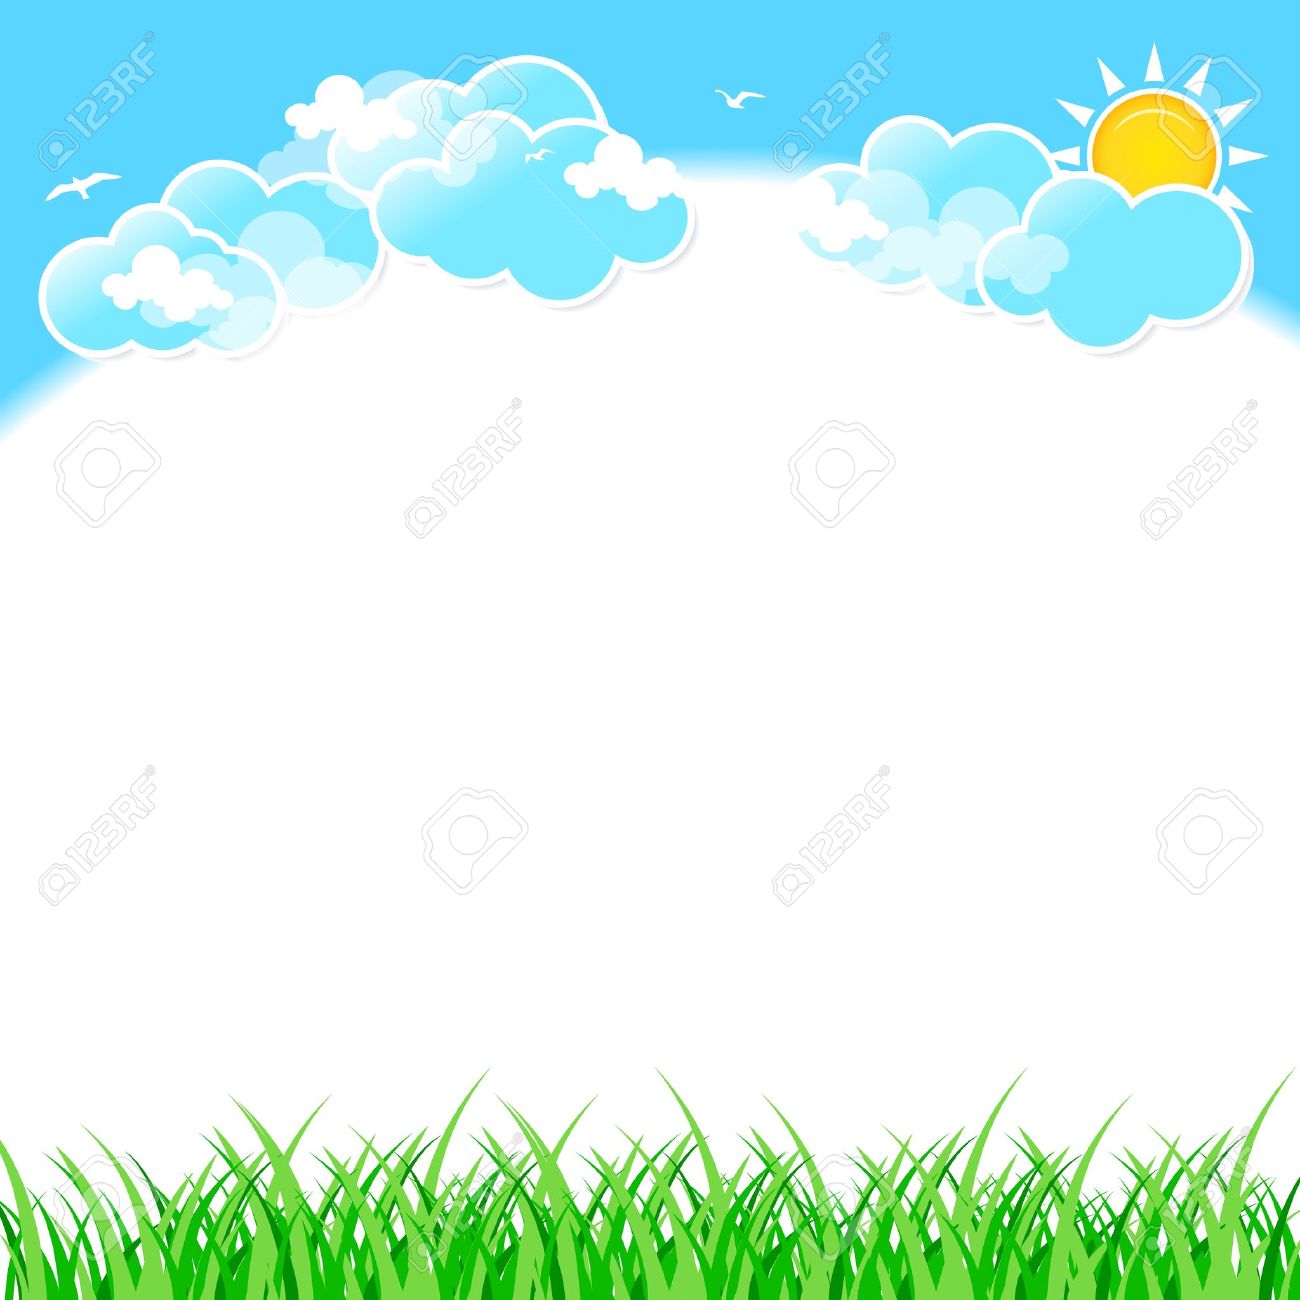 Free Nature Clipart sky, Download Free Clip Art on Owips